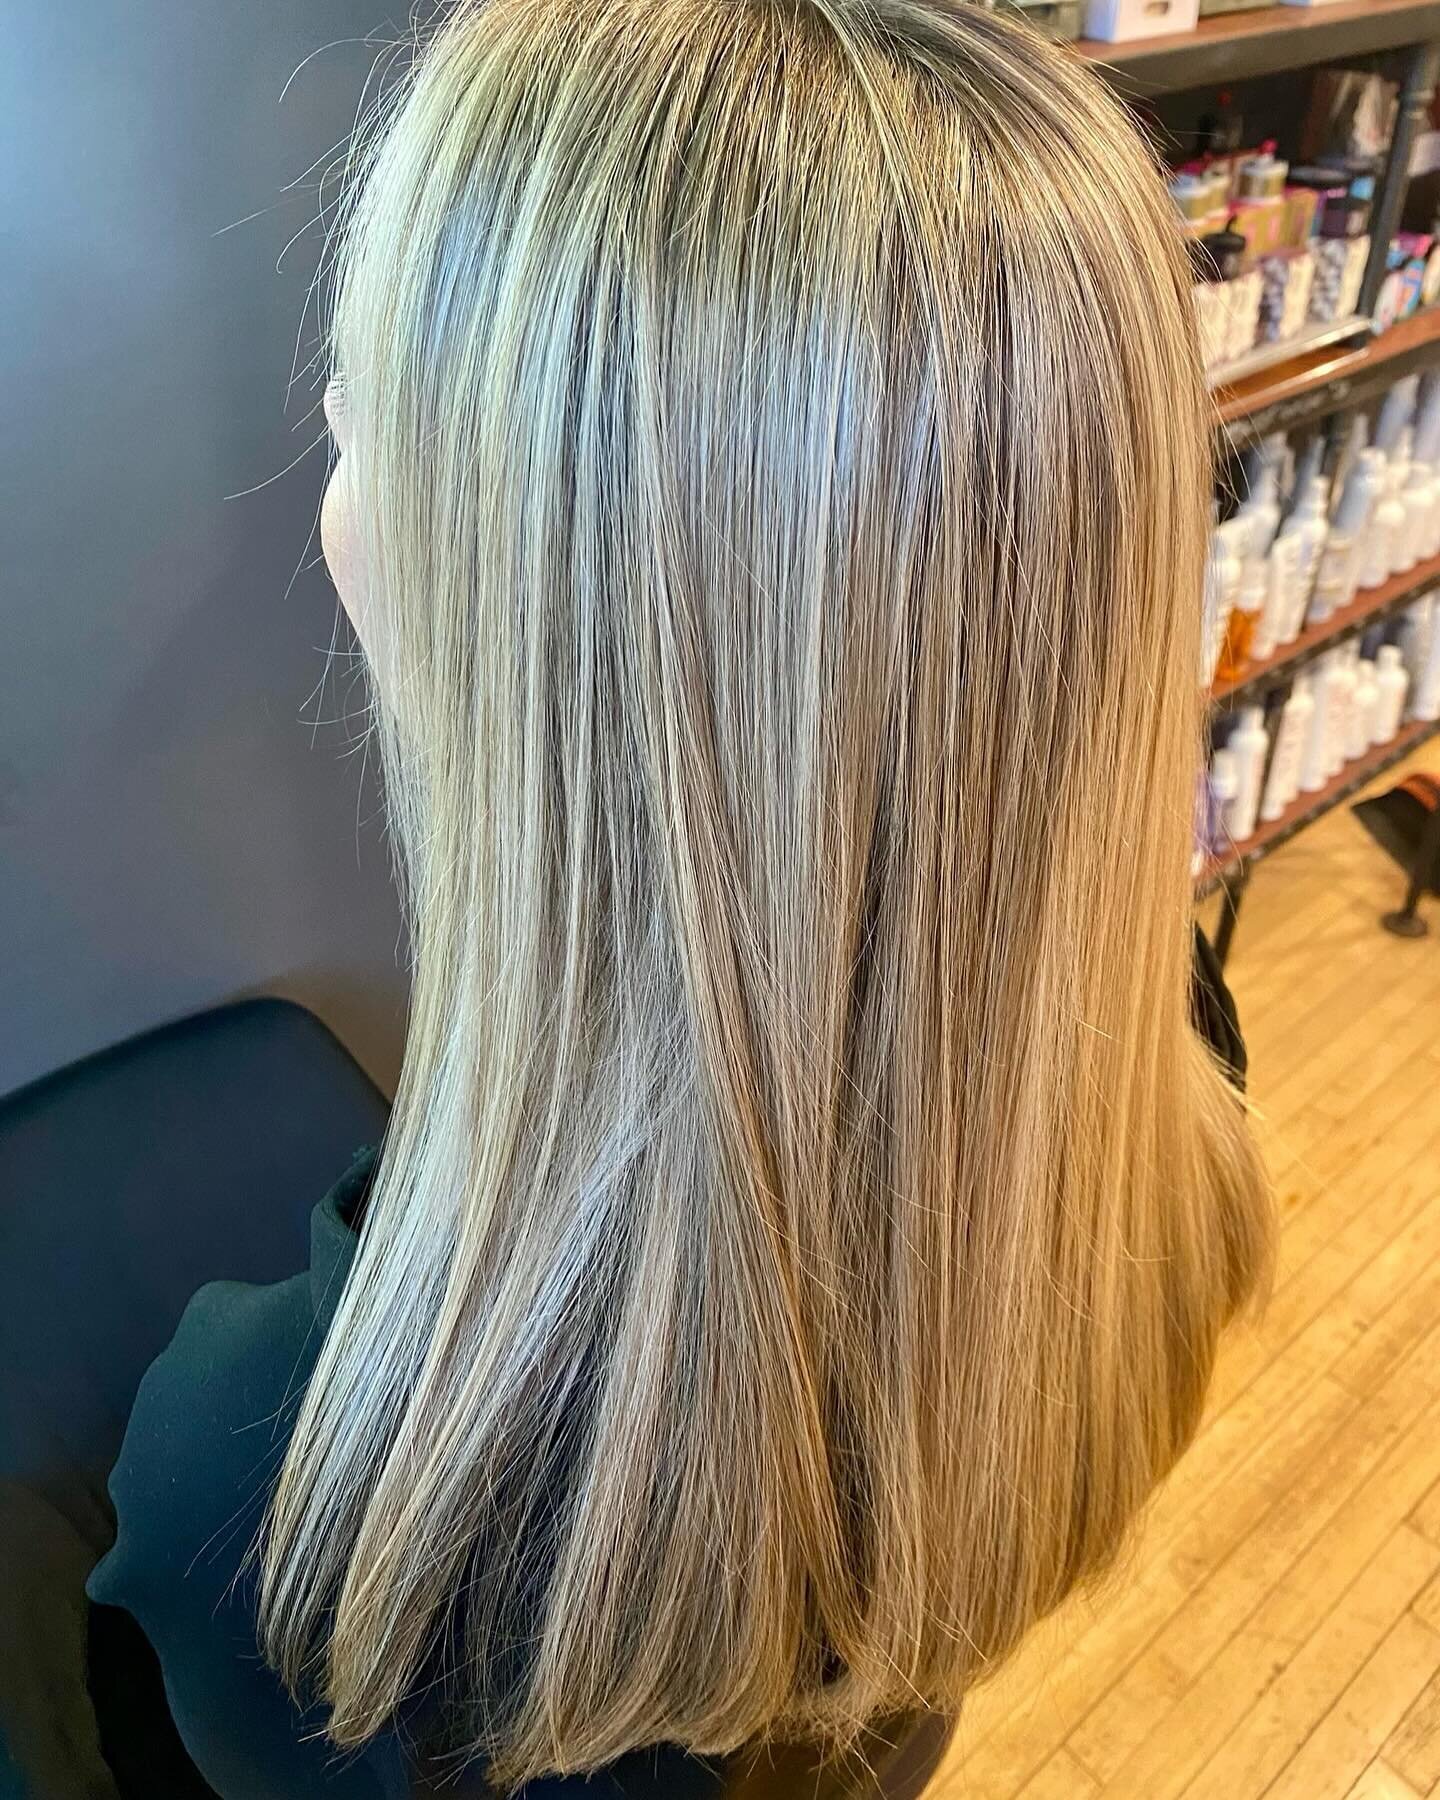 As blonde as humanly possible. 
.
.
.
#oakparkil #chicagohairstylist #blonde #riverforestil #keune